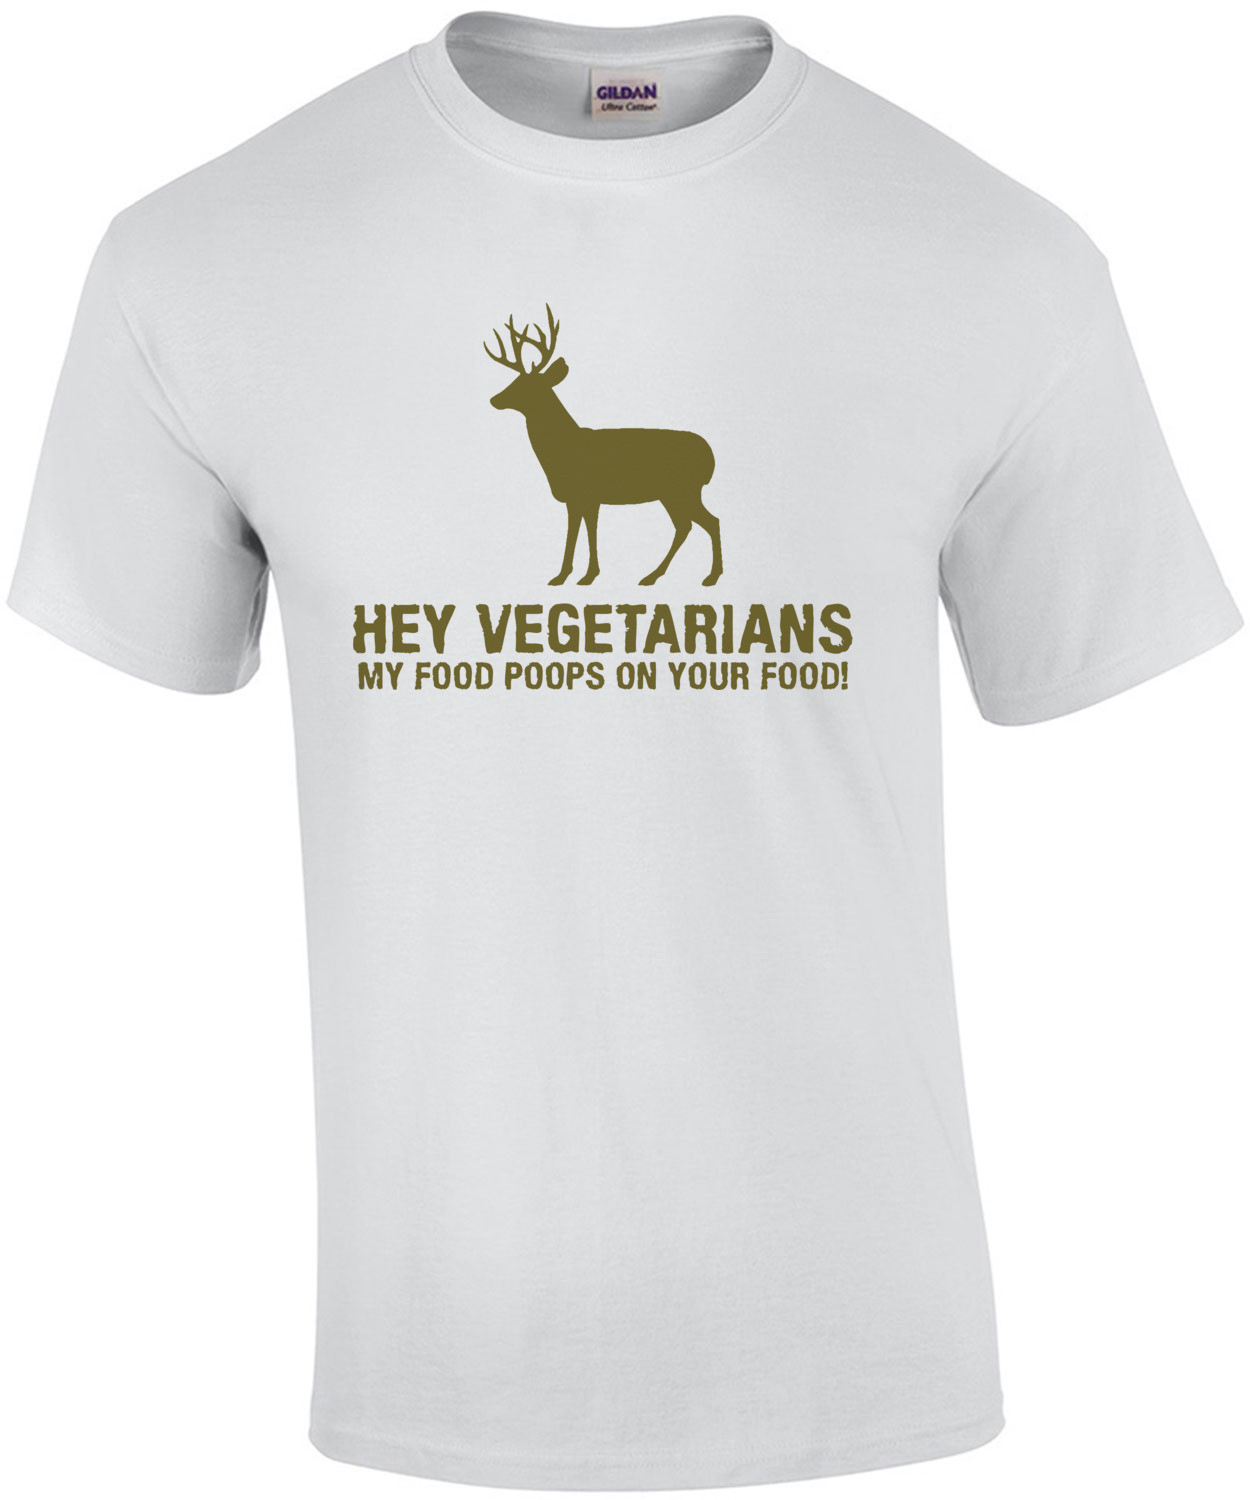 Hey Vegetarians, My Food Poops On Your Food T-Shirt